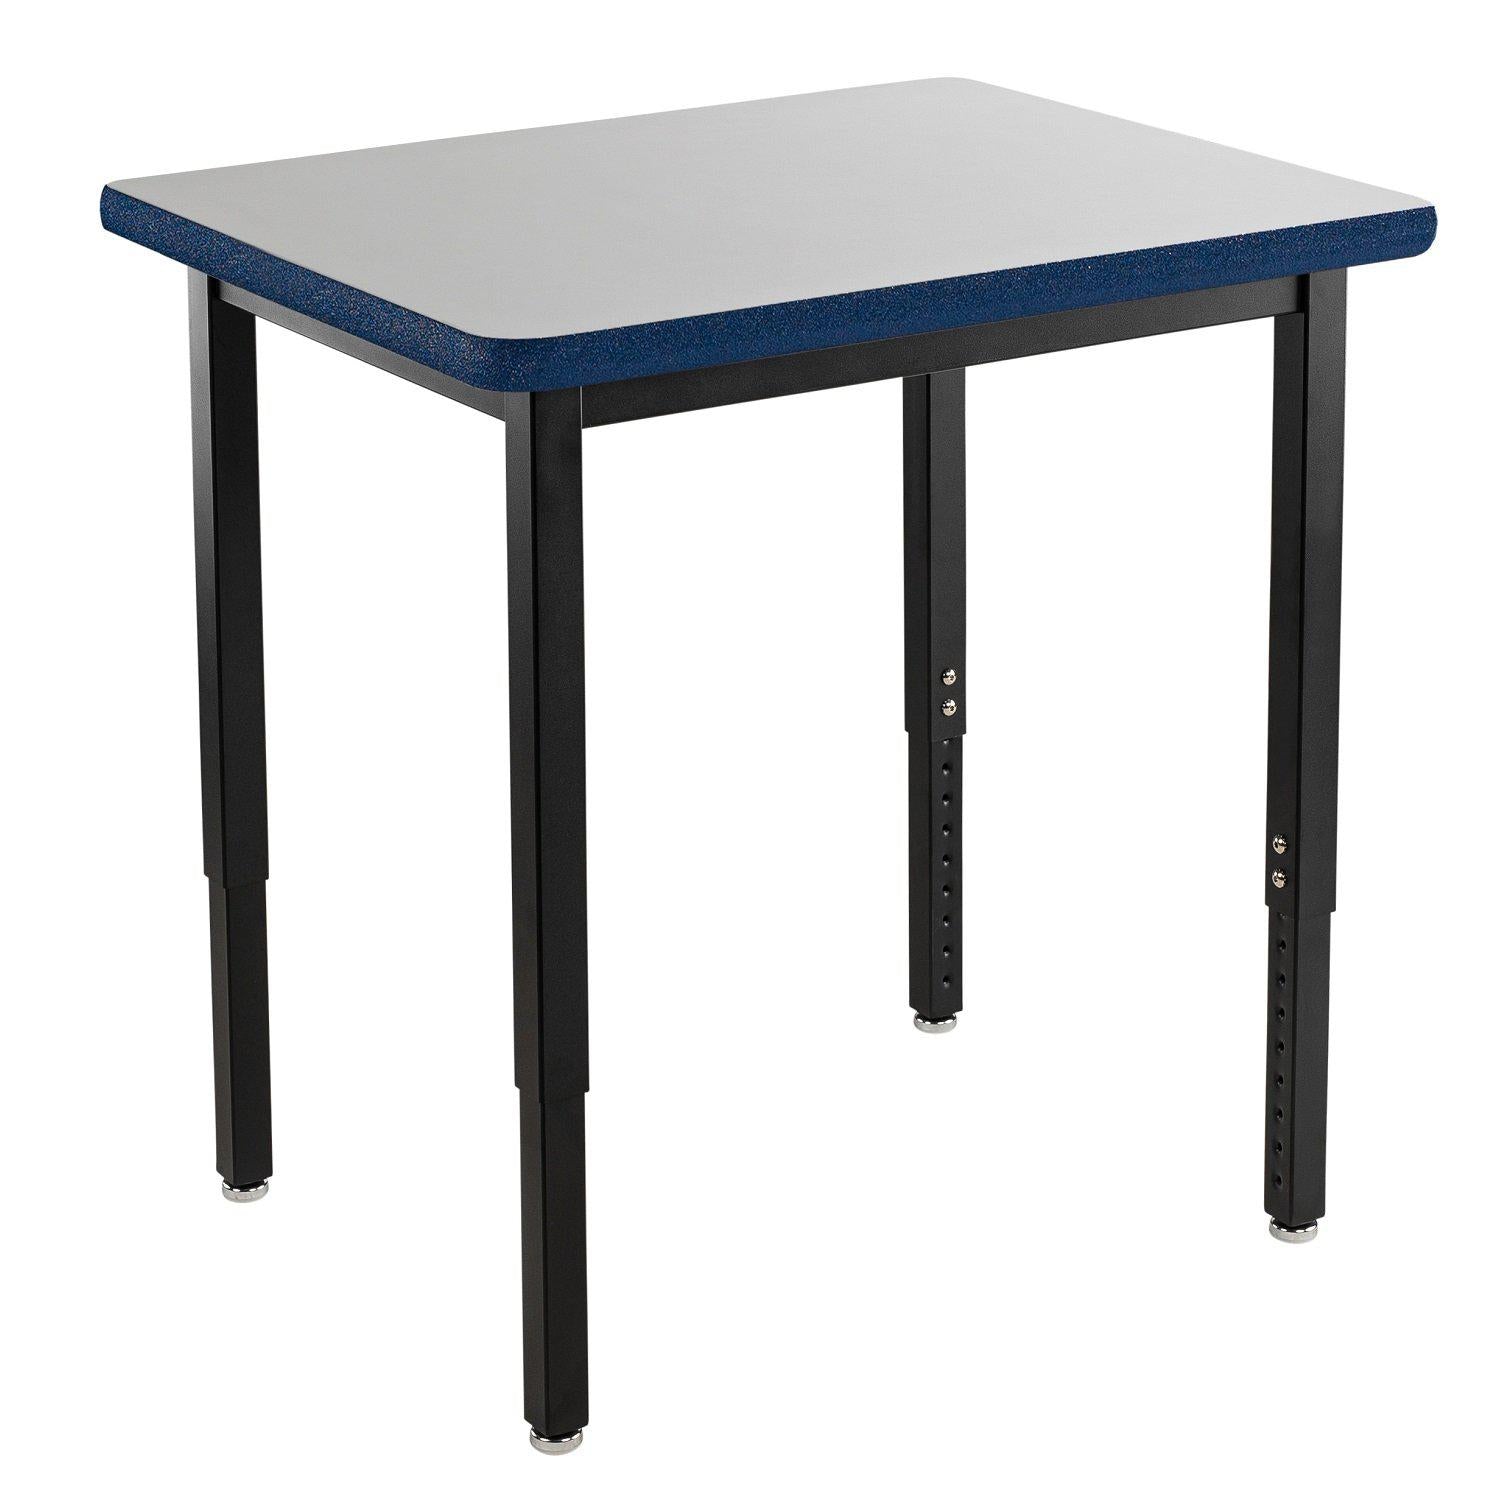 Heavy-Duty Height-Adjustable Utility Table, Black Frame, 24" x 24", Supreme High-Pressure Laminate Top with Black ProtectEdge